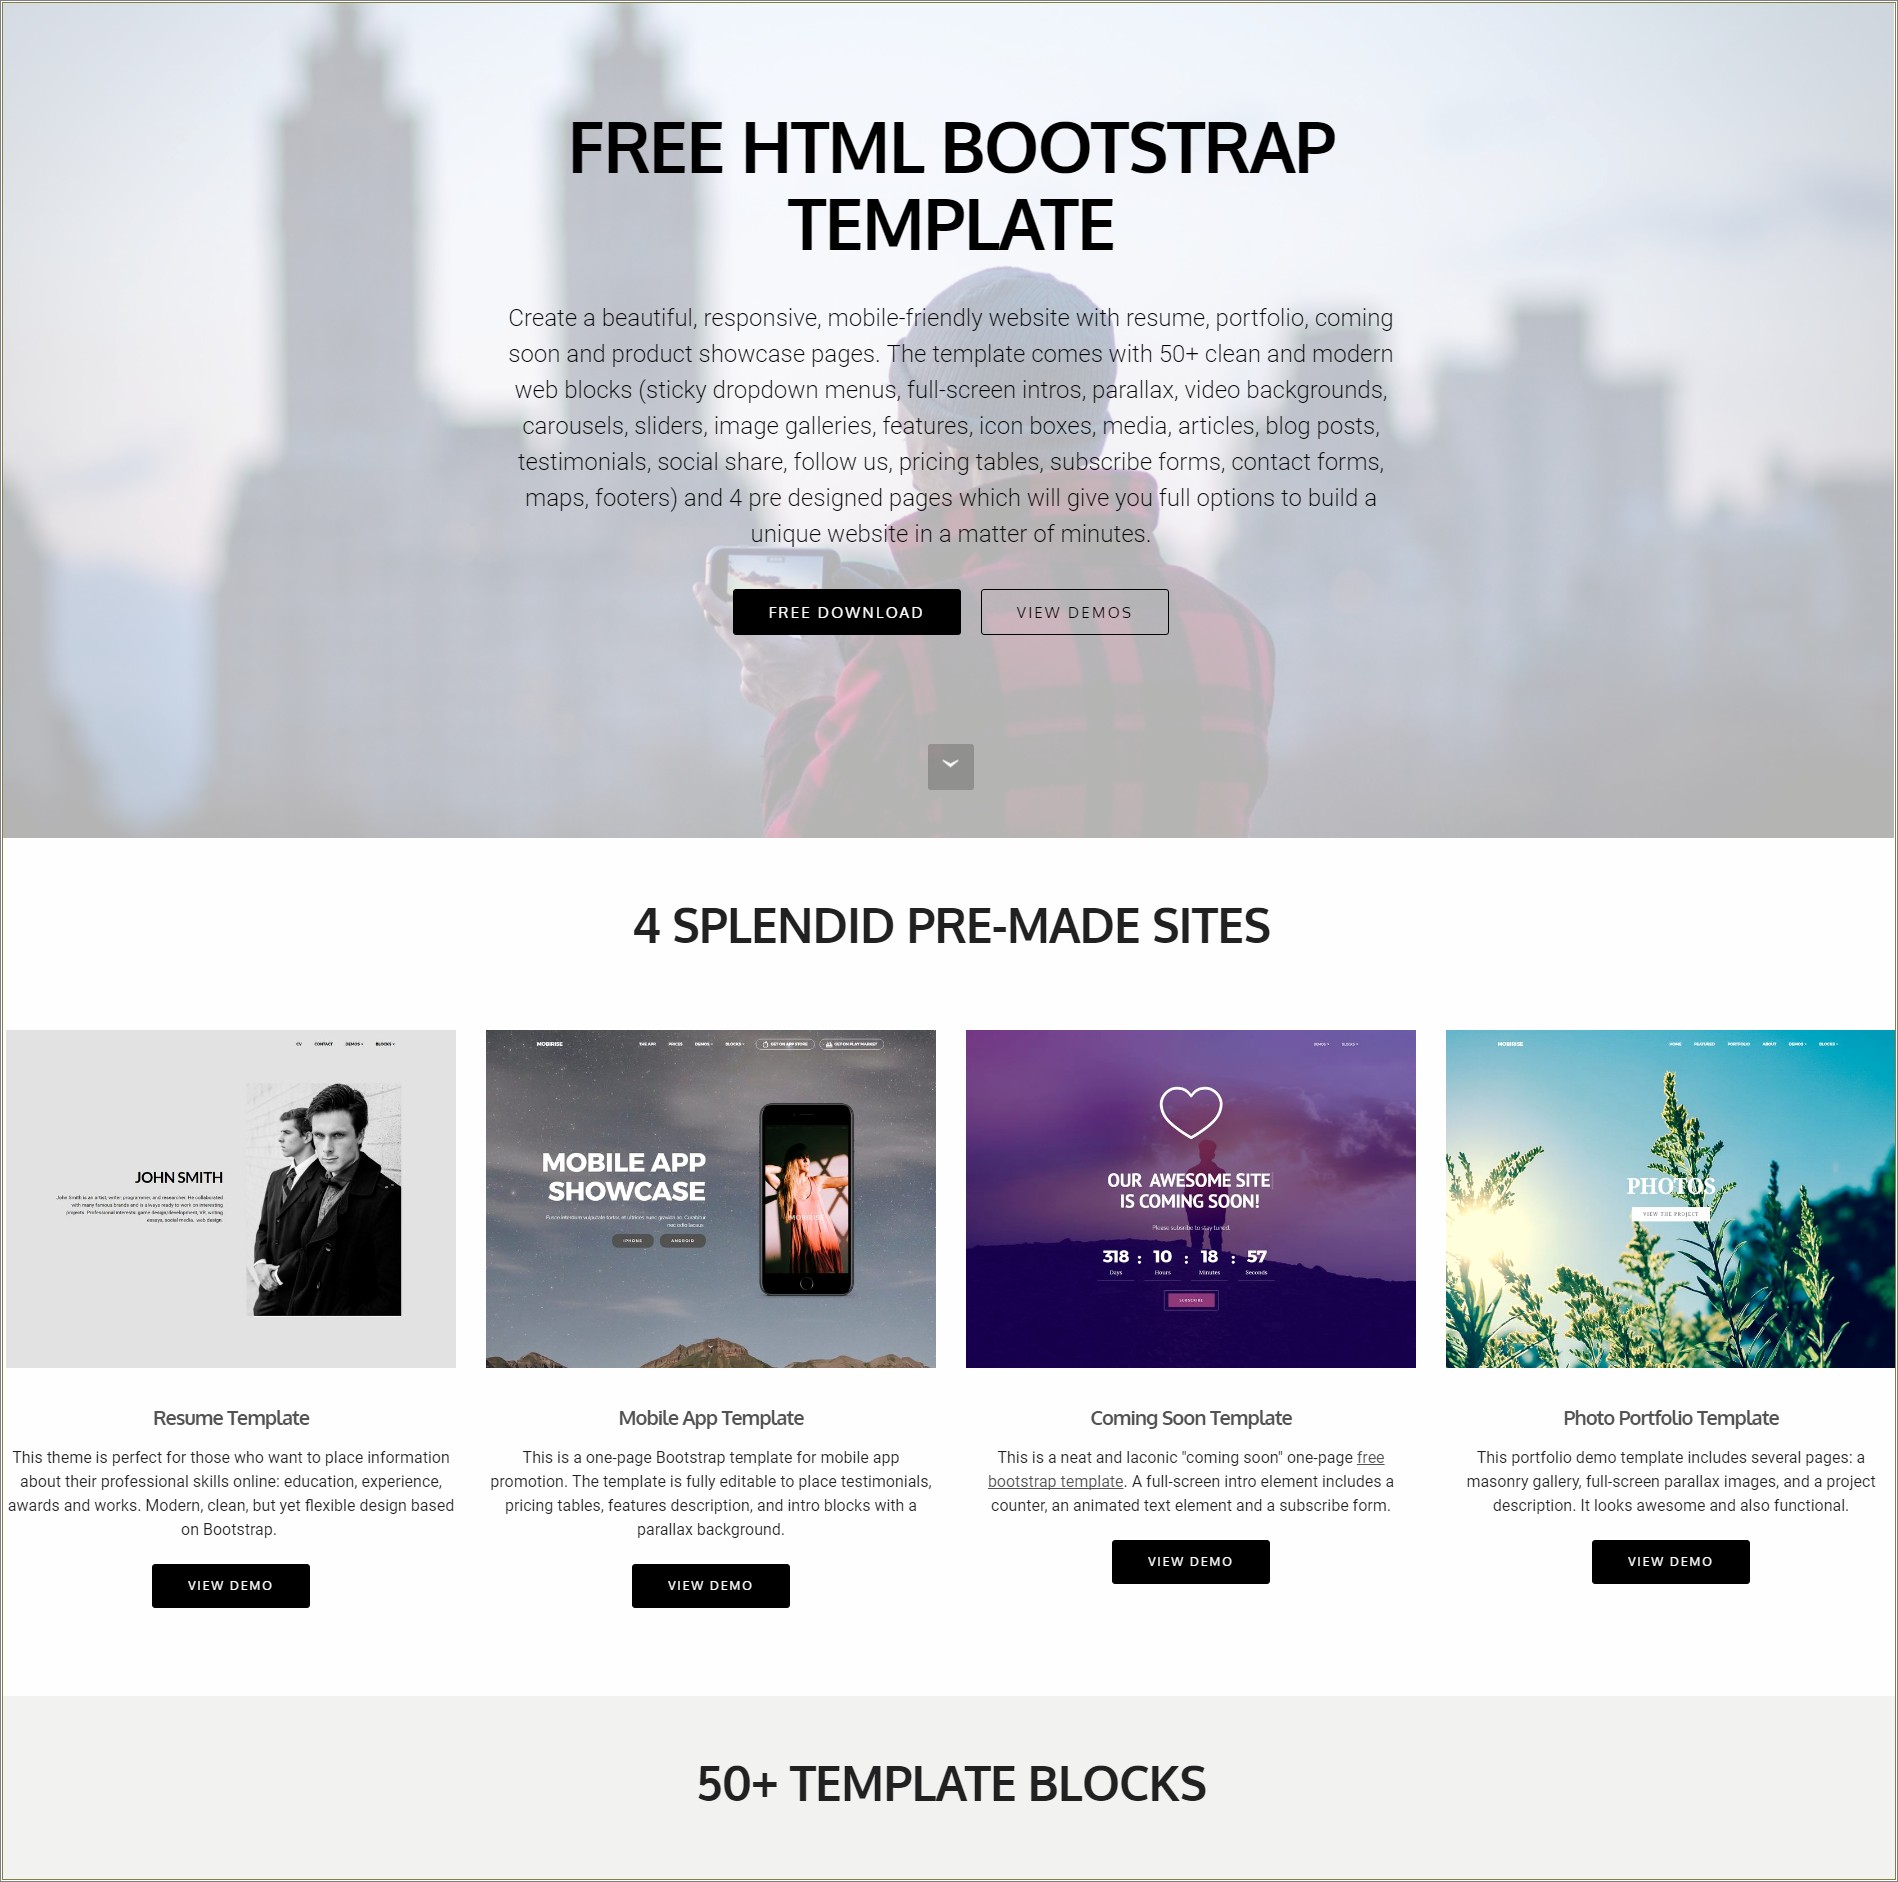 Easy To Customize Bootstrap Templates Free